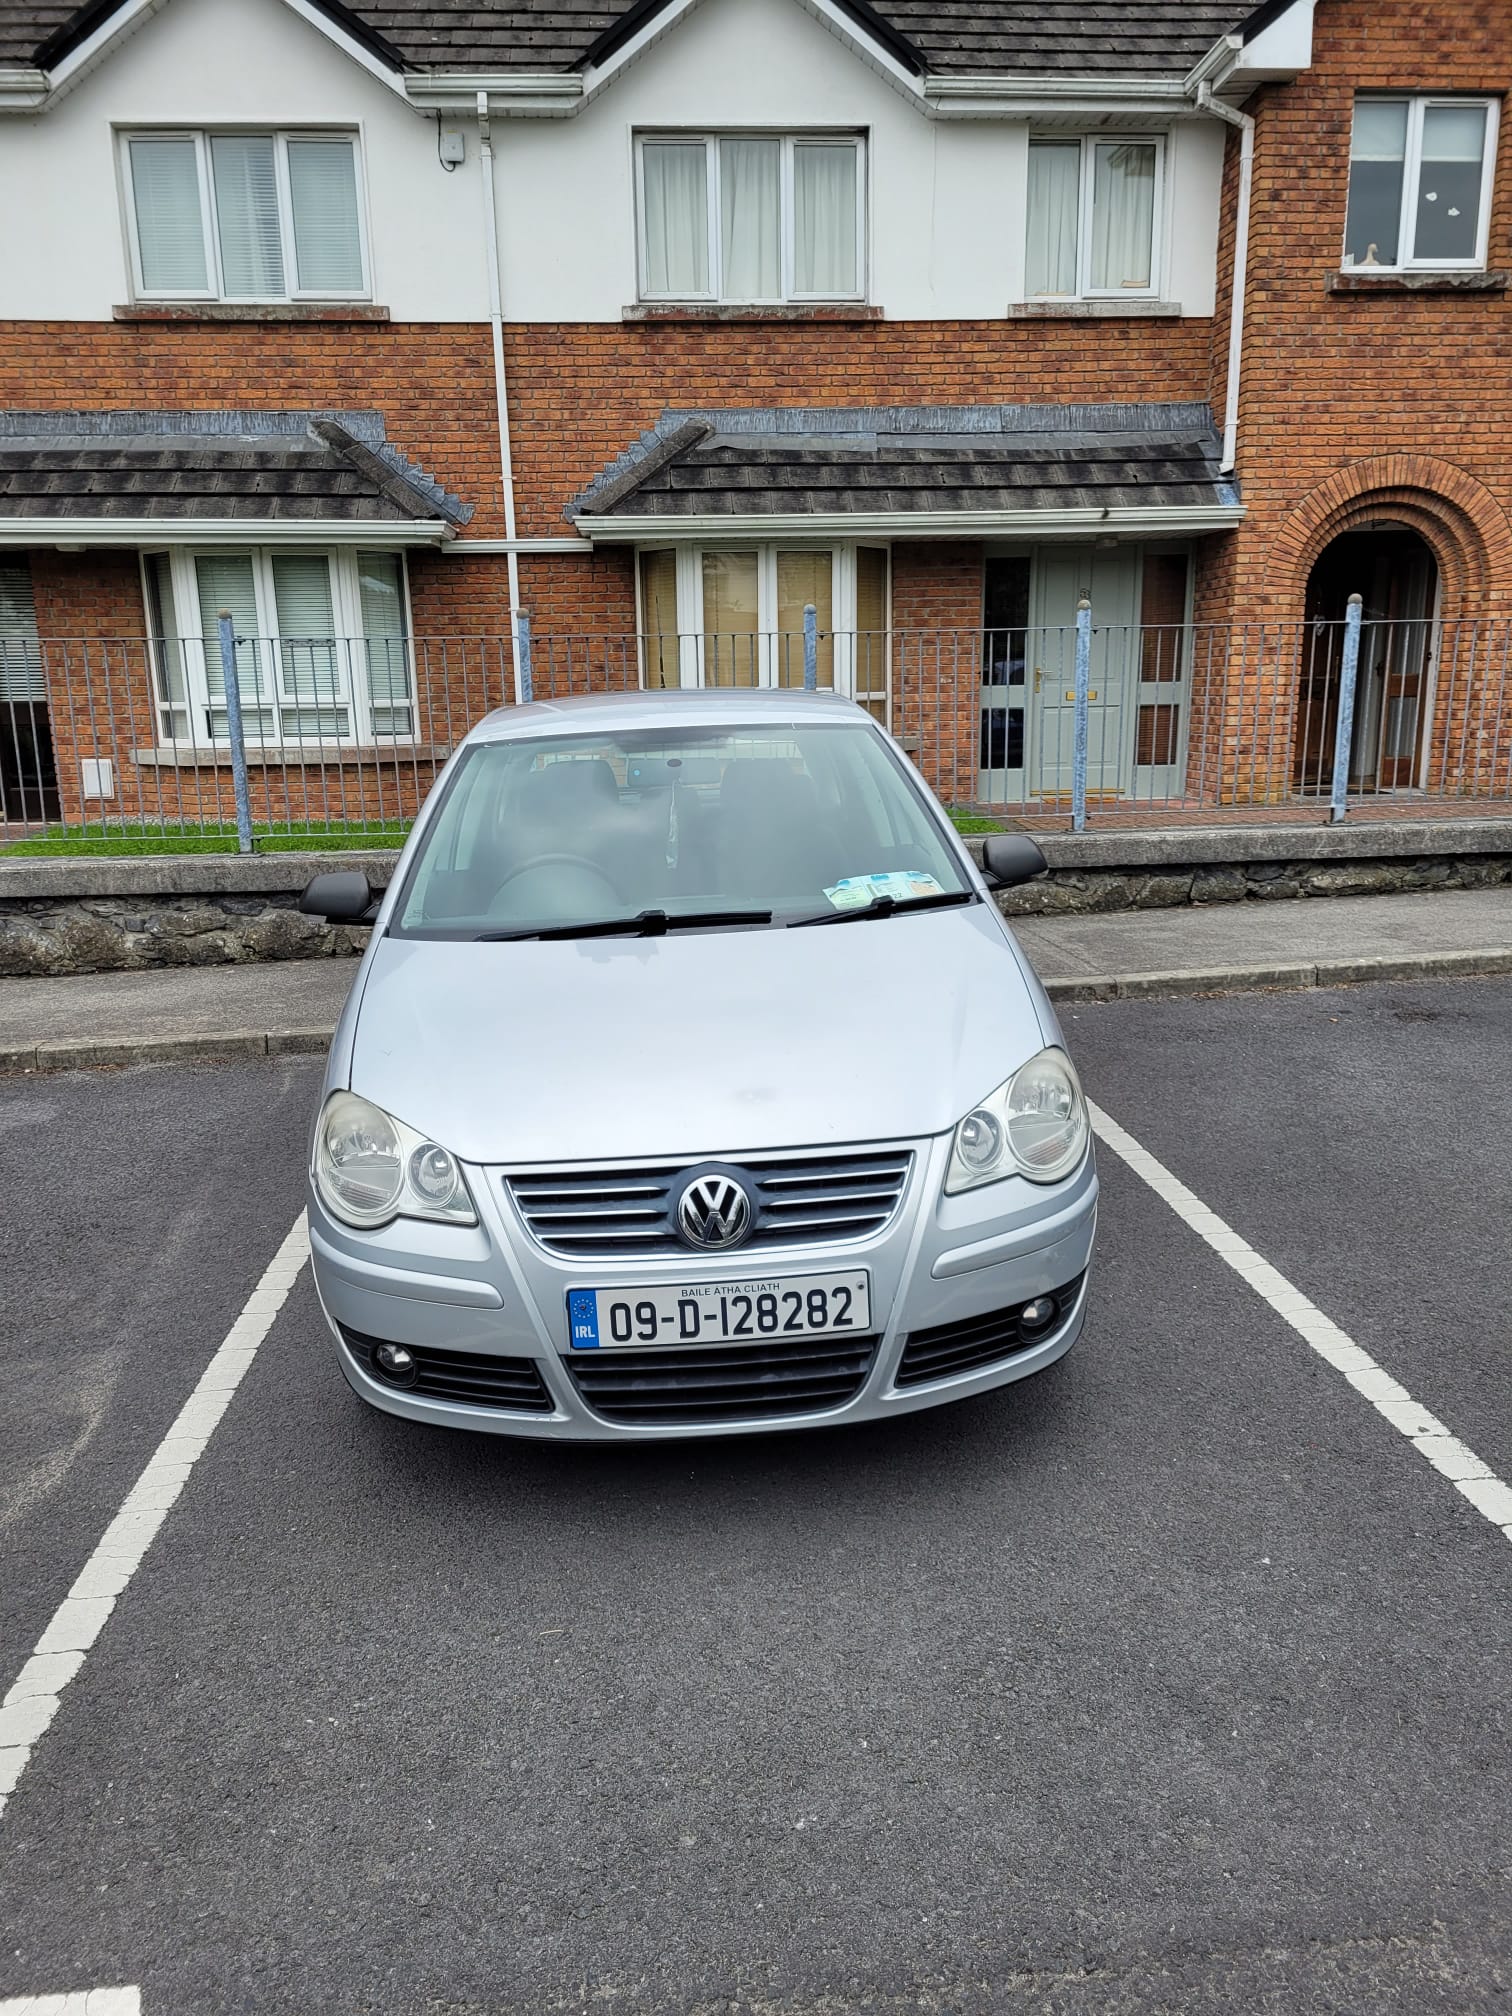 Used Volkswagen Polo 2009 in Galway